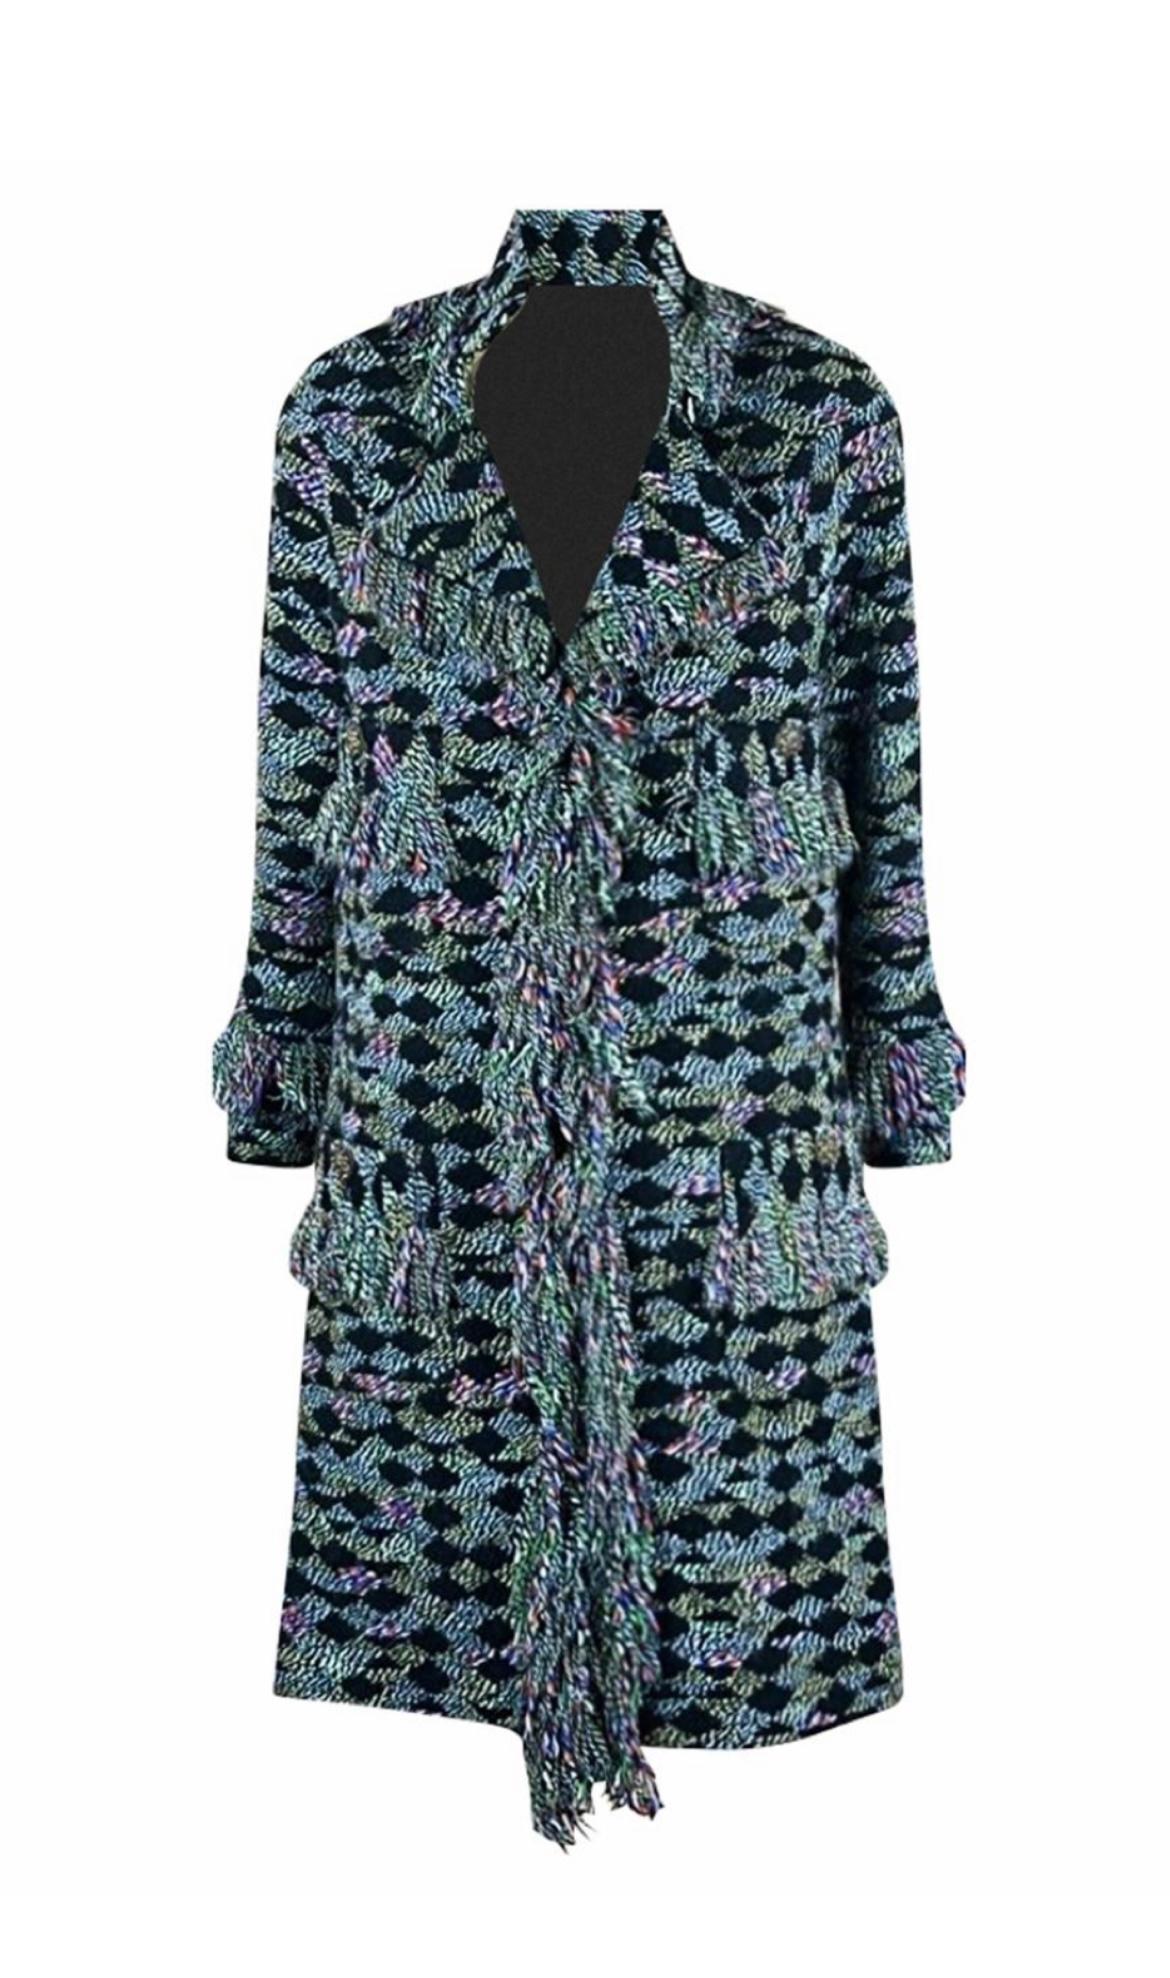 Stunning Chanel tweed coat from Runway of Paris/SALZBURG Metiers d'Art Collection, 2015 Pre-Fall
Retail price ca. 9,000$
- made of fantasy tweed with signature fringe edging
- CC logo Jewel buttons embellished with natural stones and crystals
-